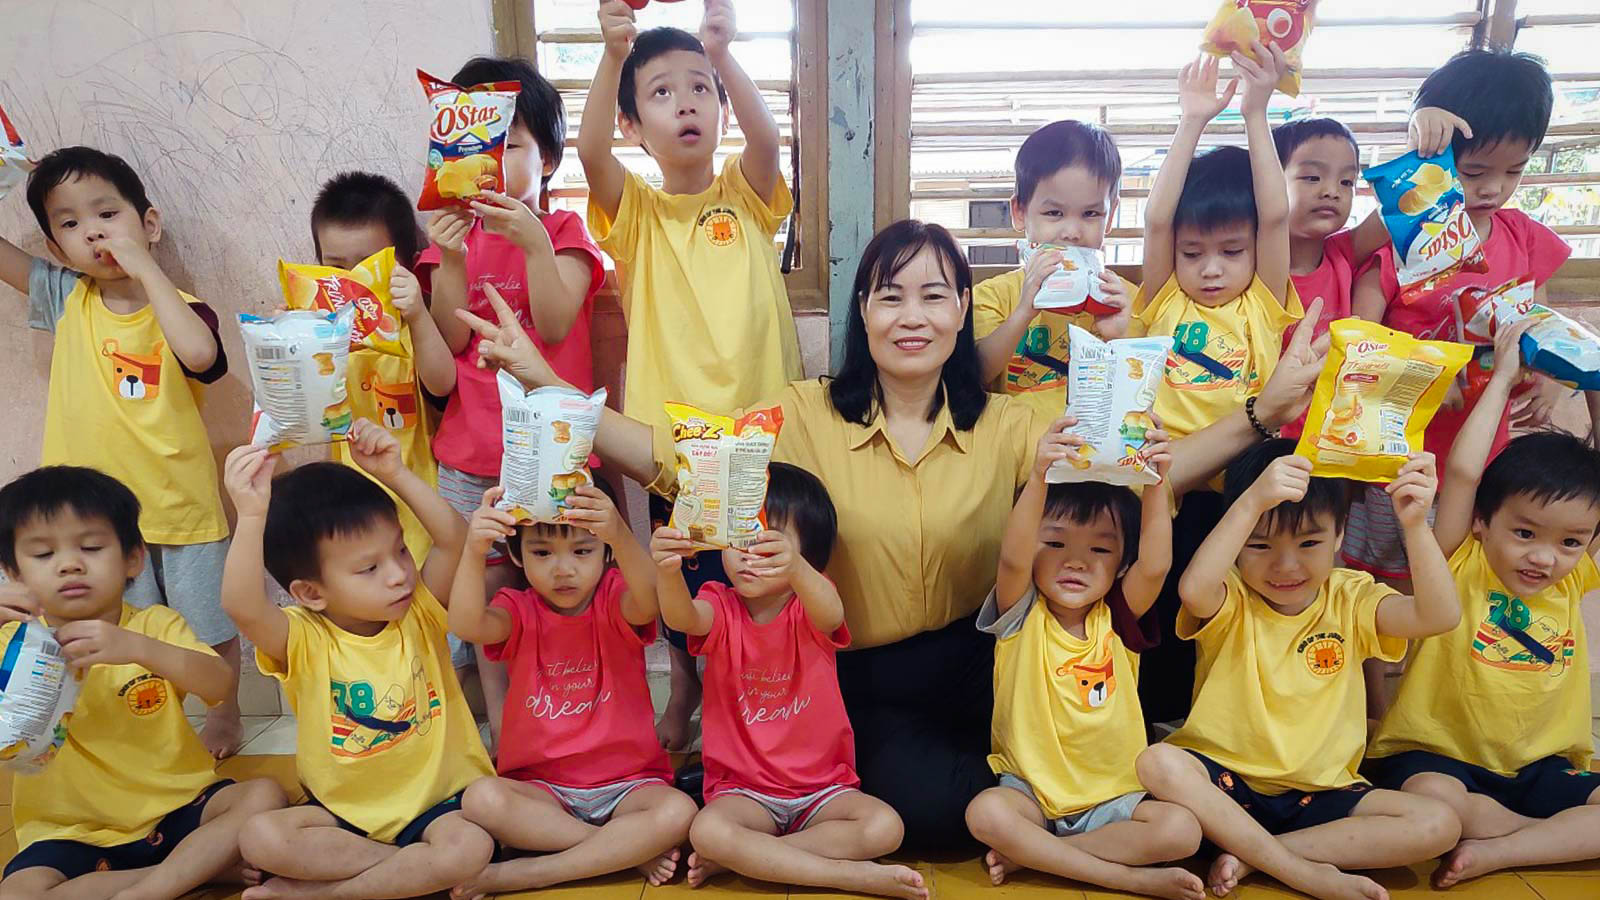 group of children in yellow shirts holding up prizes